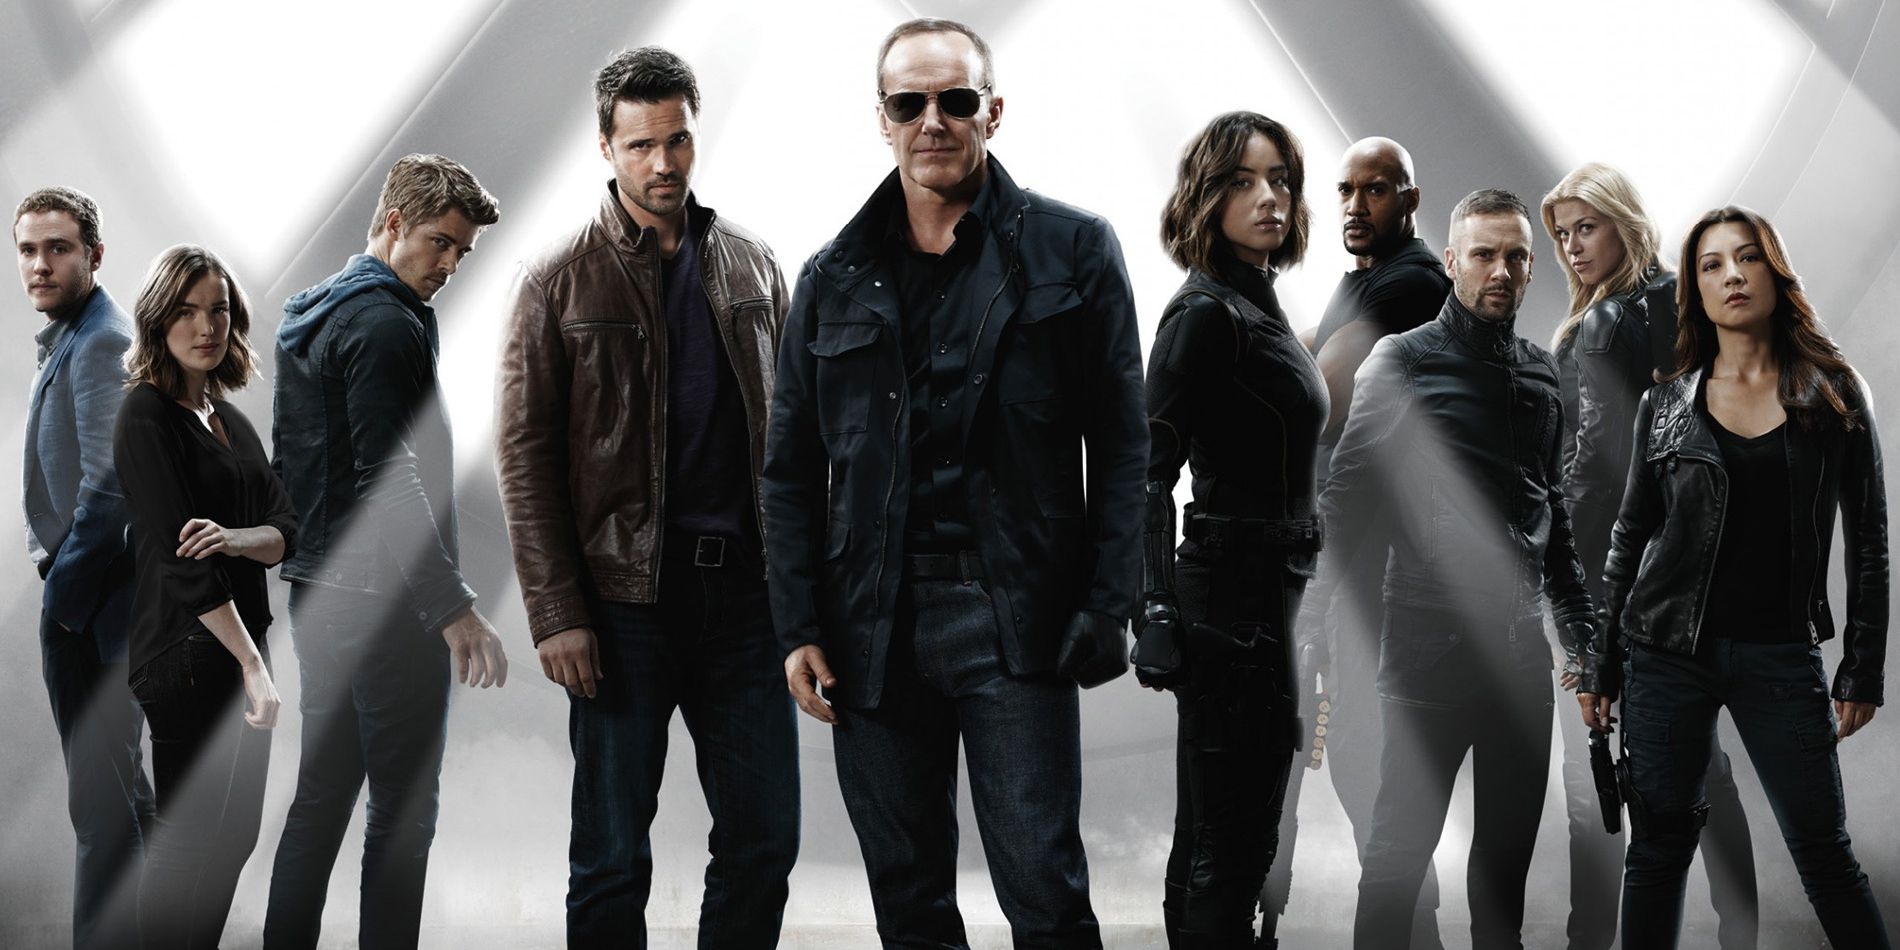 The cast of Agents of SHIELD